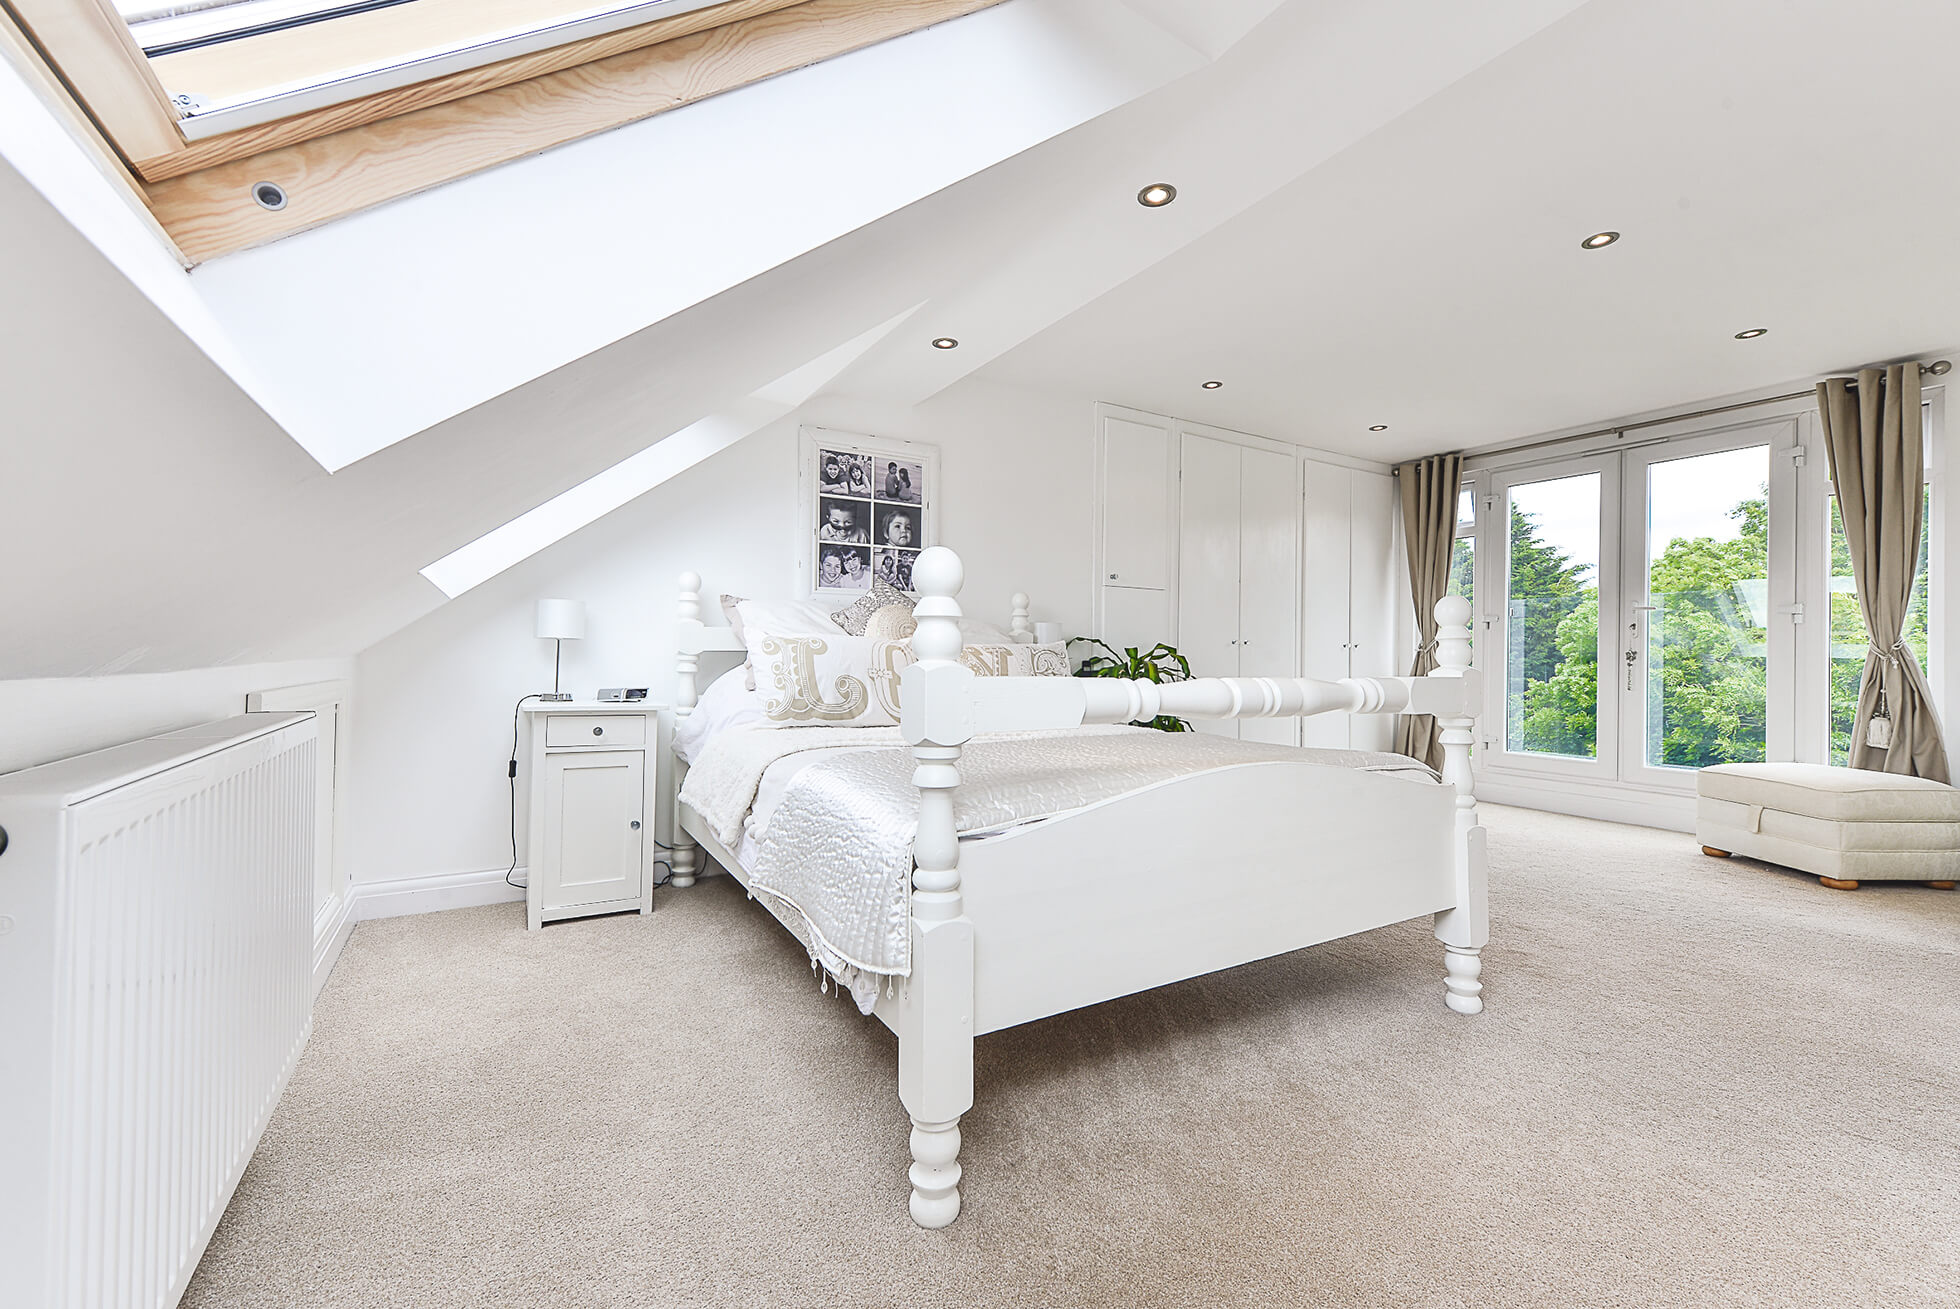 Do you have a question about converting your Loft in Weston? Here are the most popular questions asked by our clients.